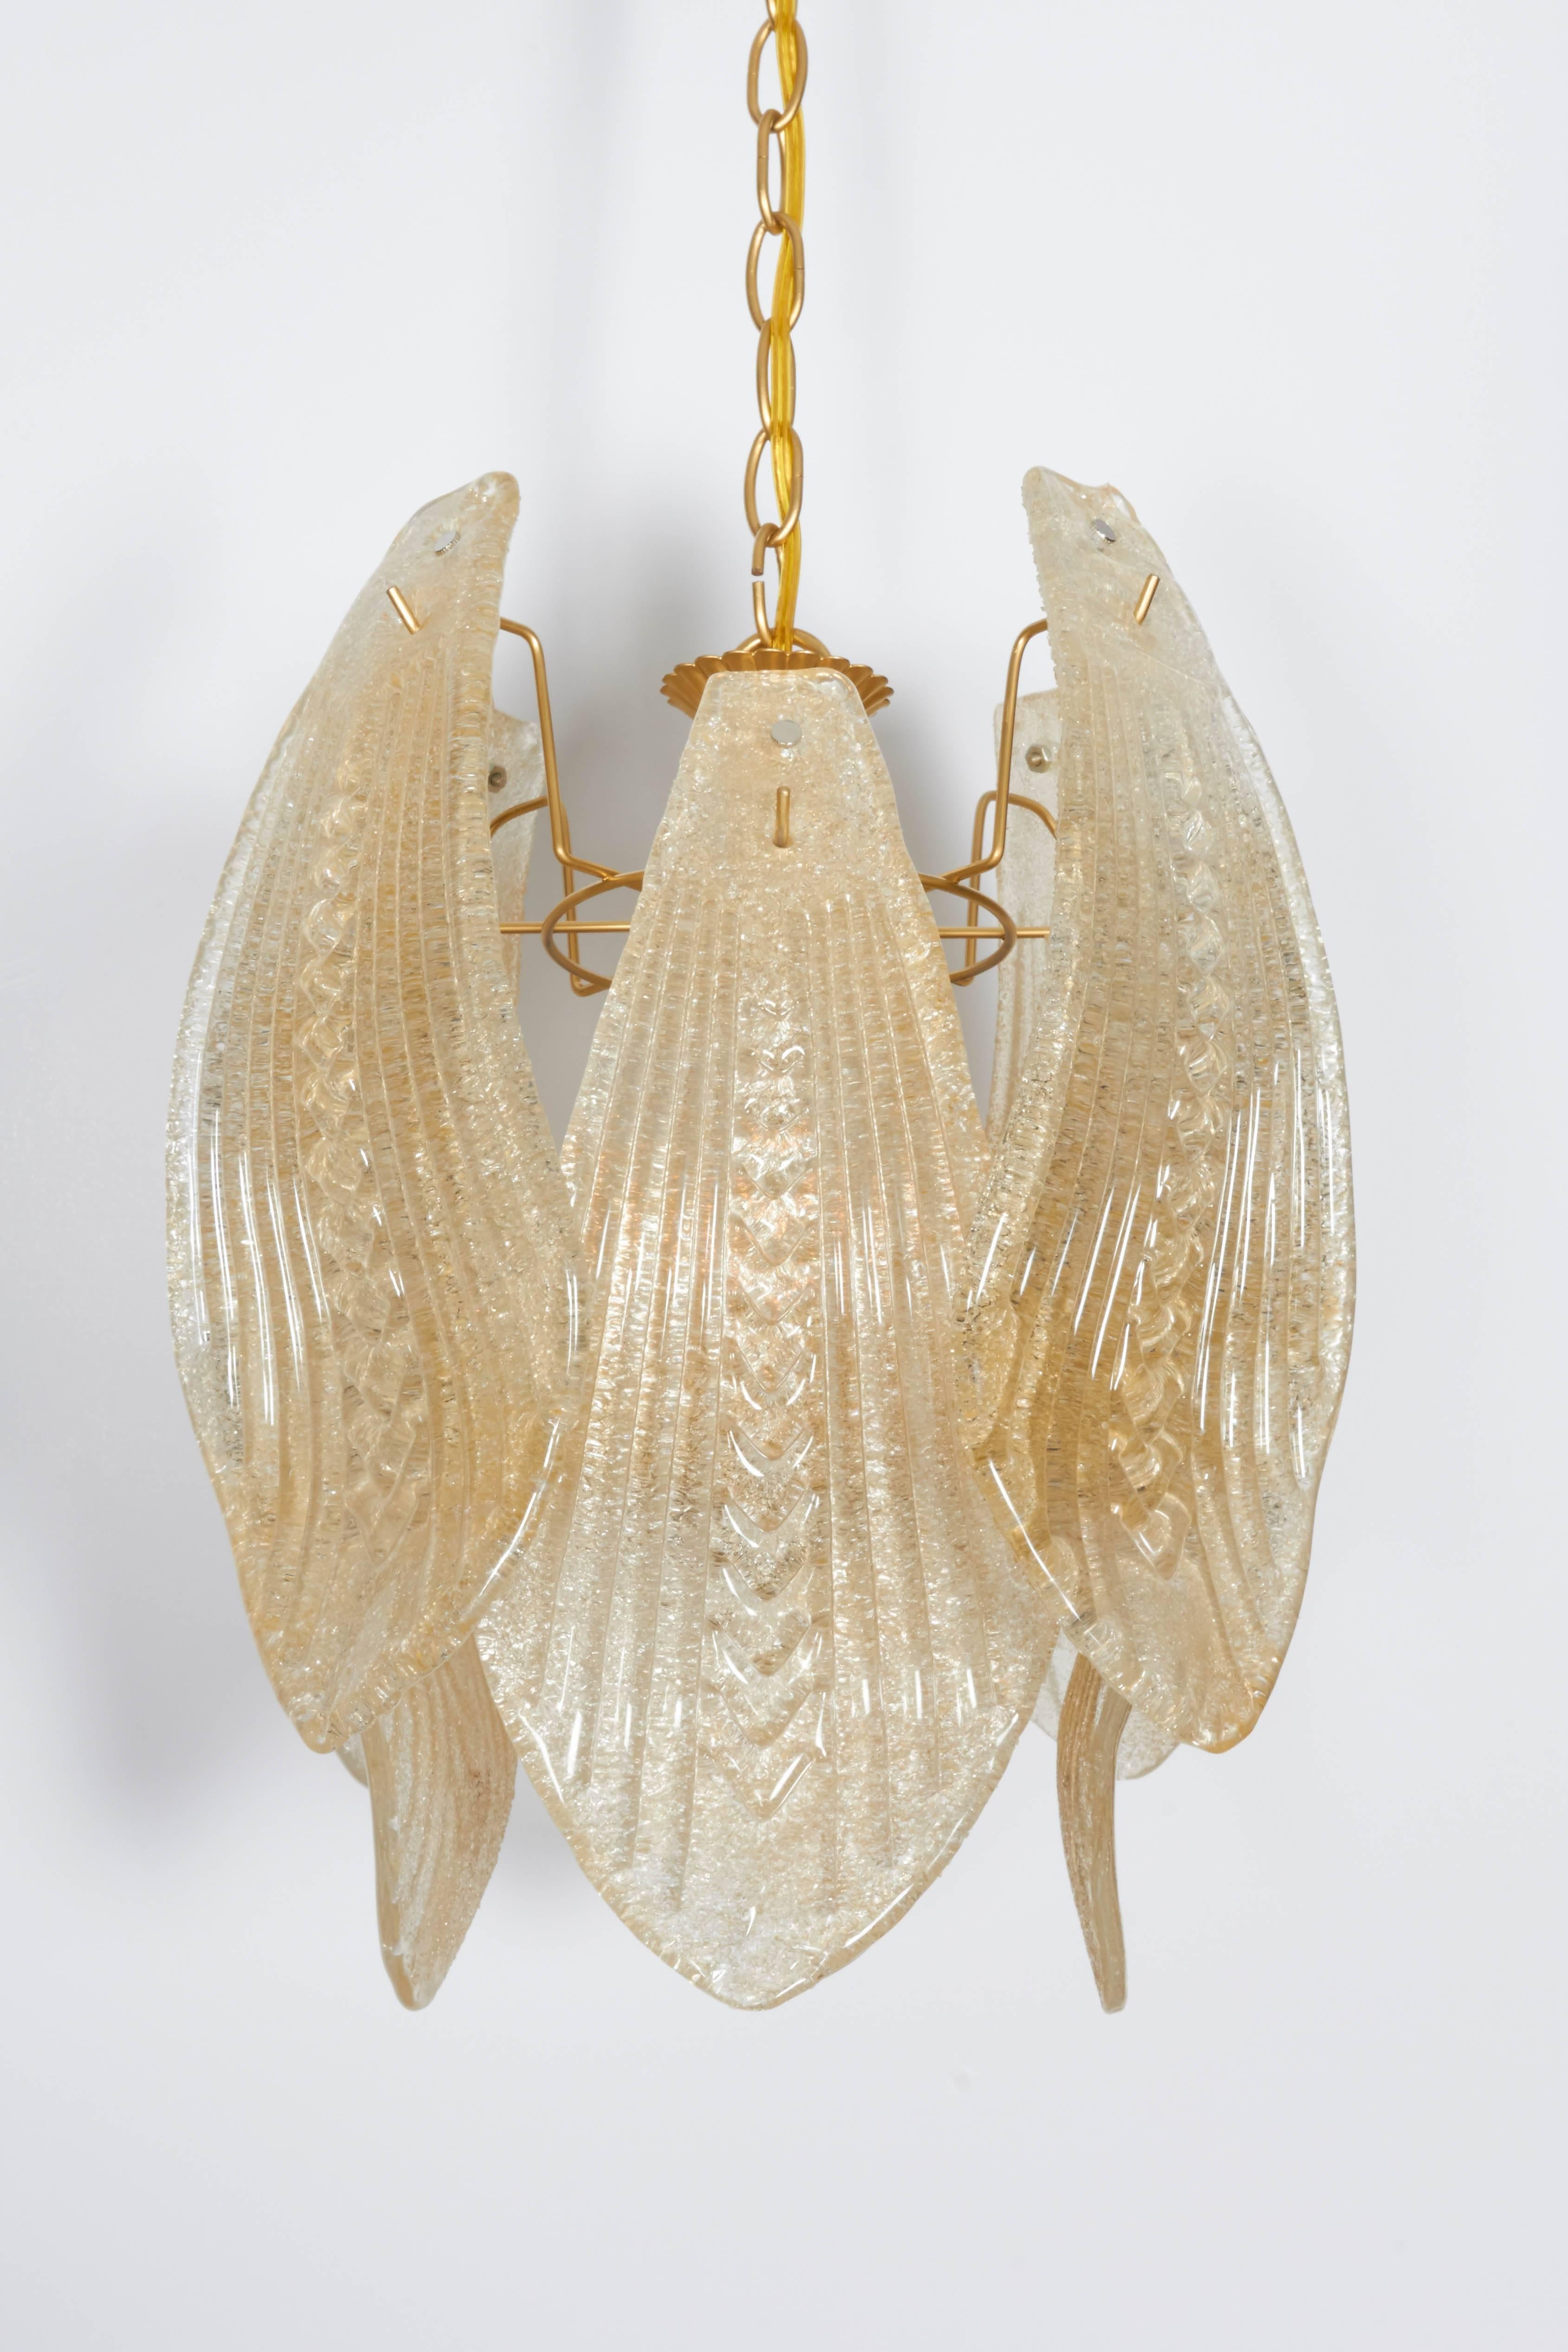 Mid-Century Art Deco Style Pendant with Textured Murano Glass im Zustand „Gut“ in New York, NY